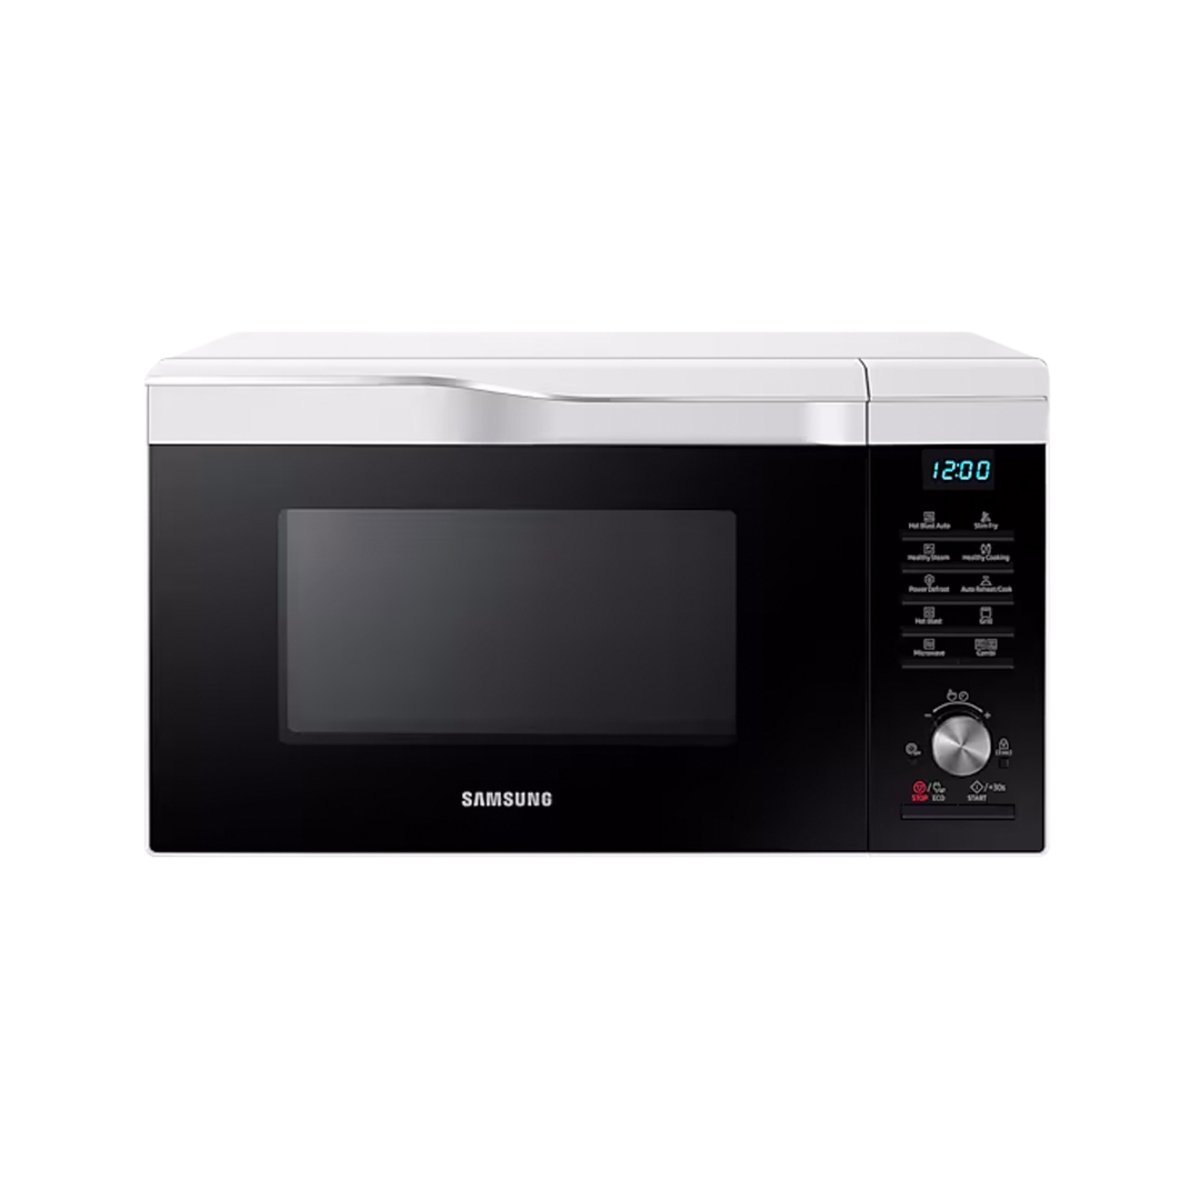 Samsung Convection Microwave Oven 28L MC28M6035KW